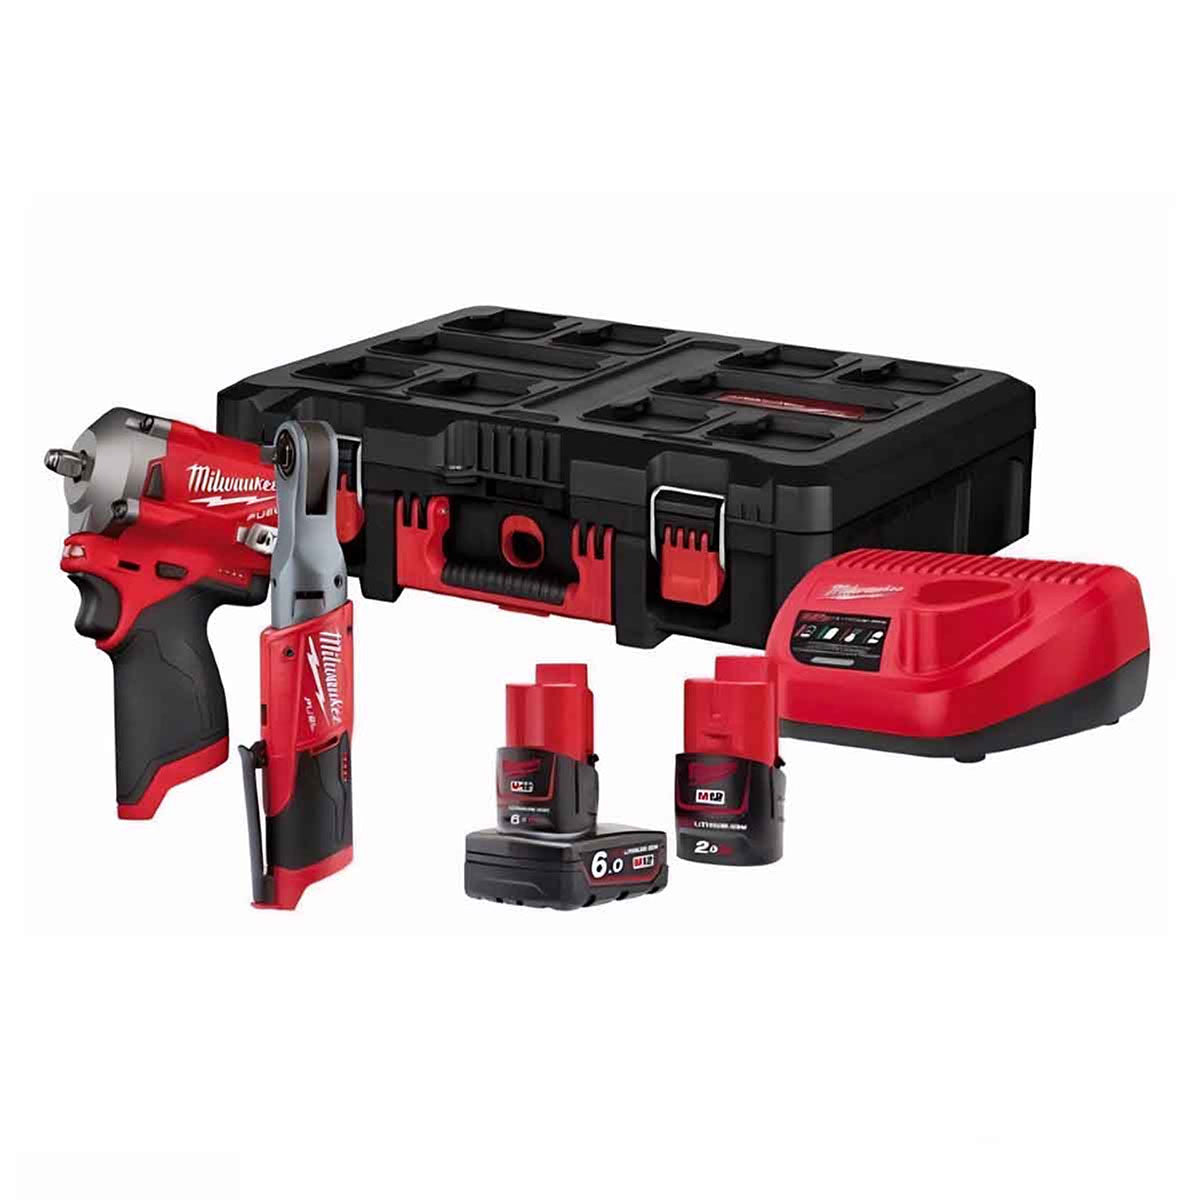 Milwaukee M12FPP2H-622P 12V Fuel Brushless 3/8" Impact Wrench and Ratchet with 2 x Battery Charge & Case 4933471743